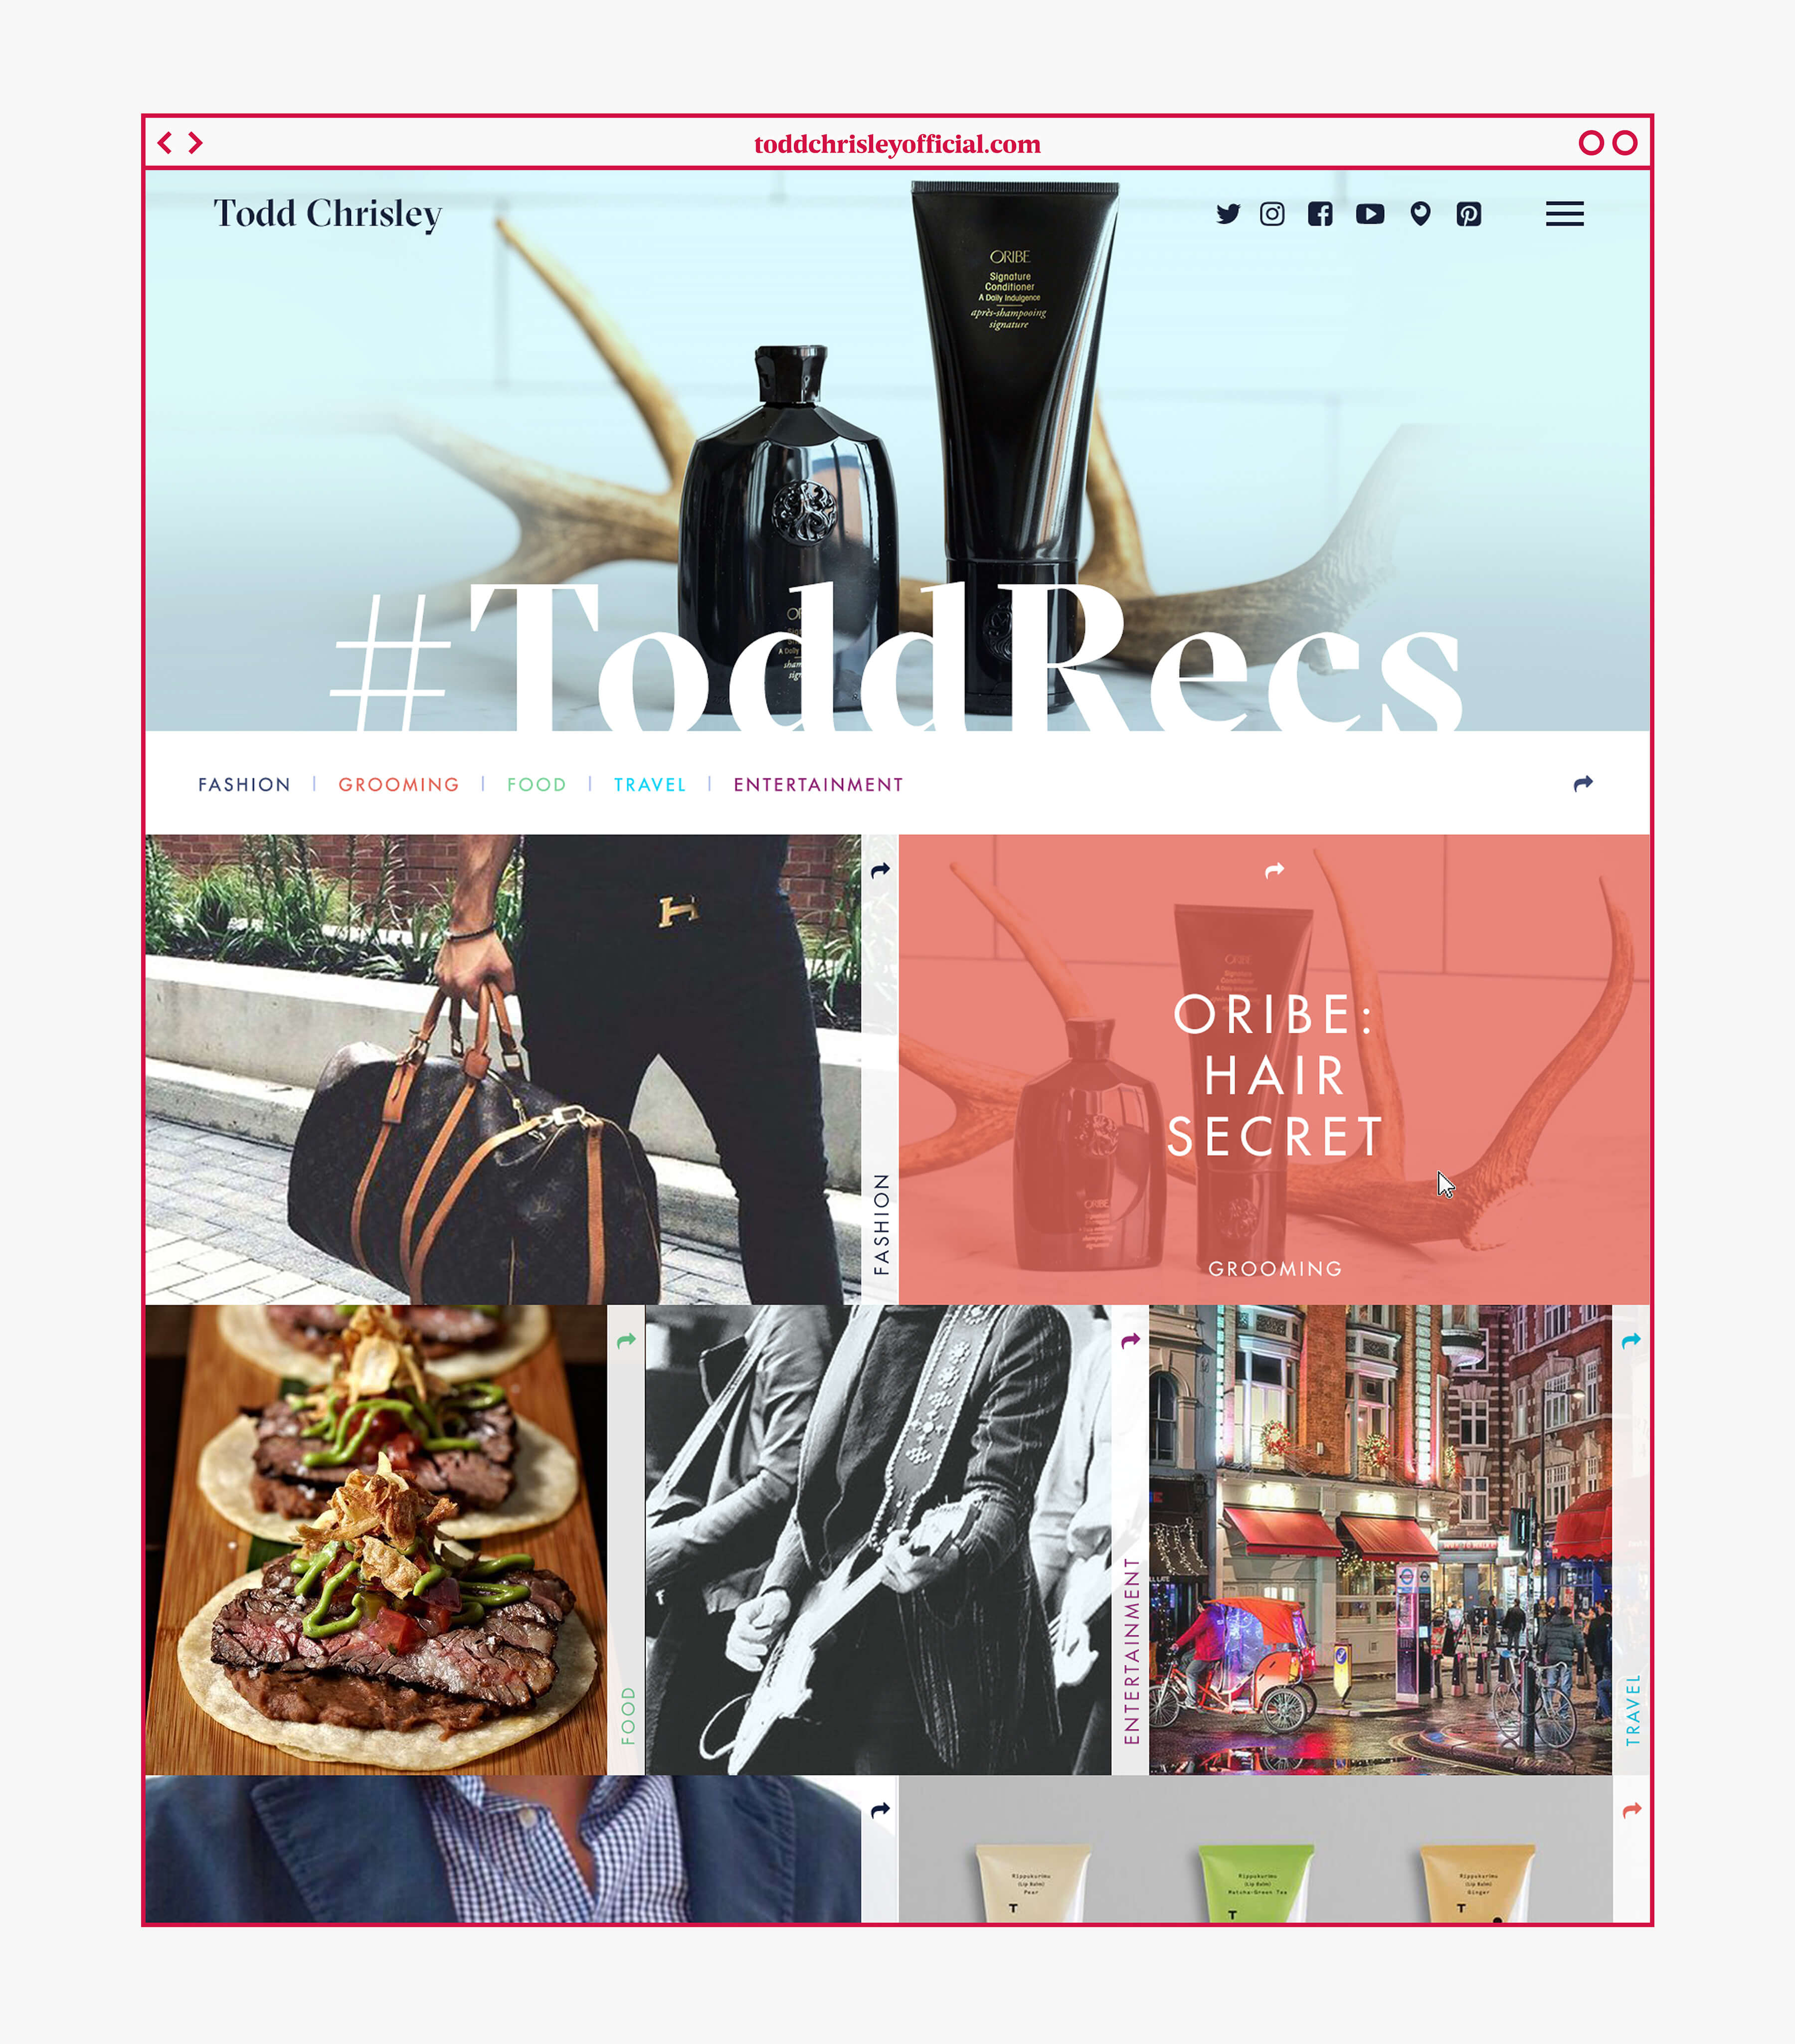 Image of the ToddRecs page for recommendations from Todd Chrisley.